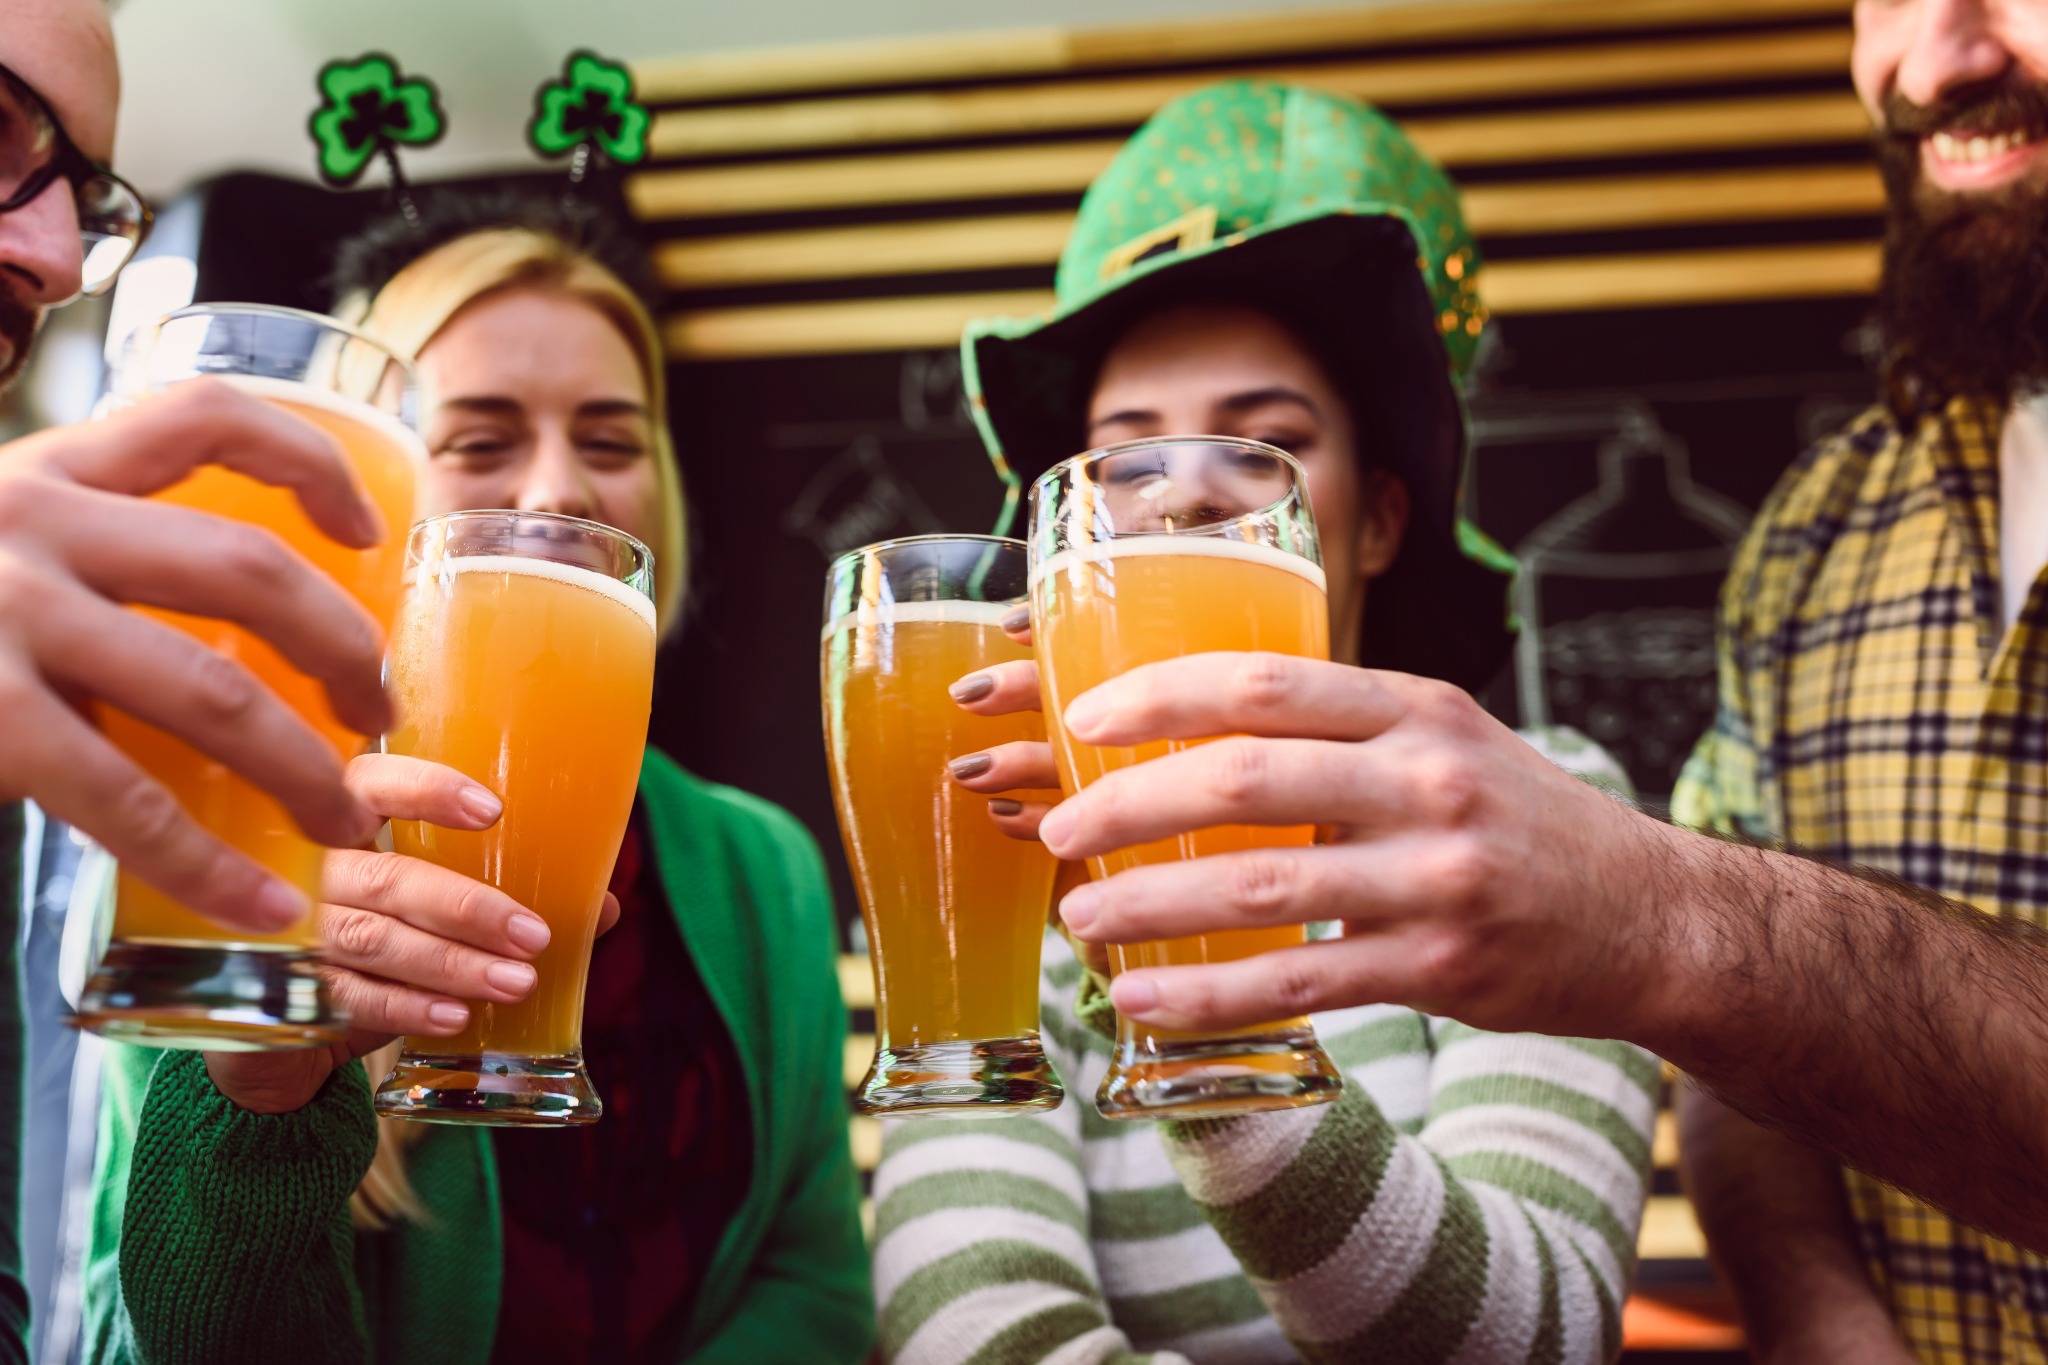 Show Your Irish Spirit with a St. Patrick’s Day Outfit